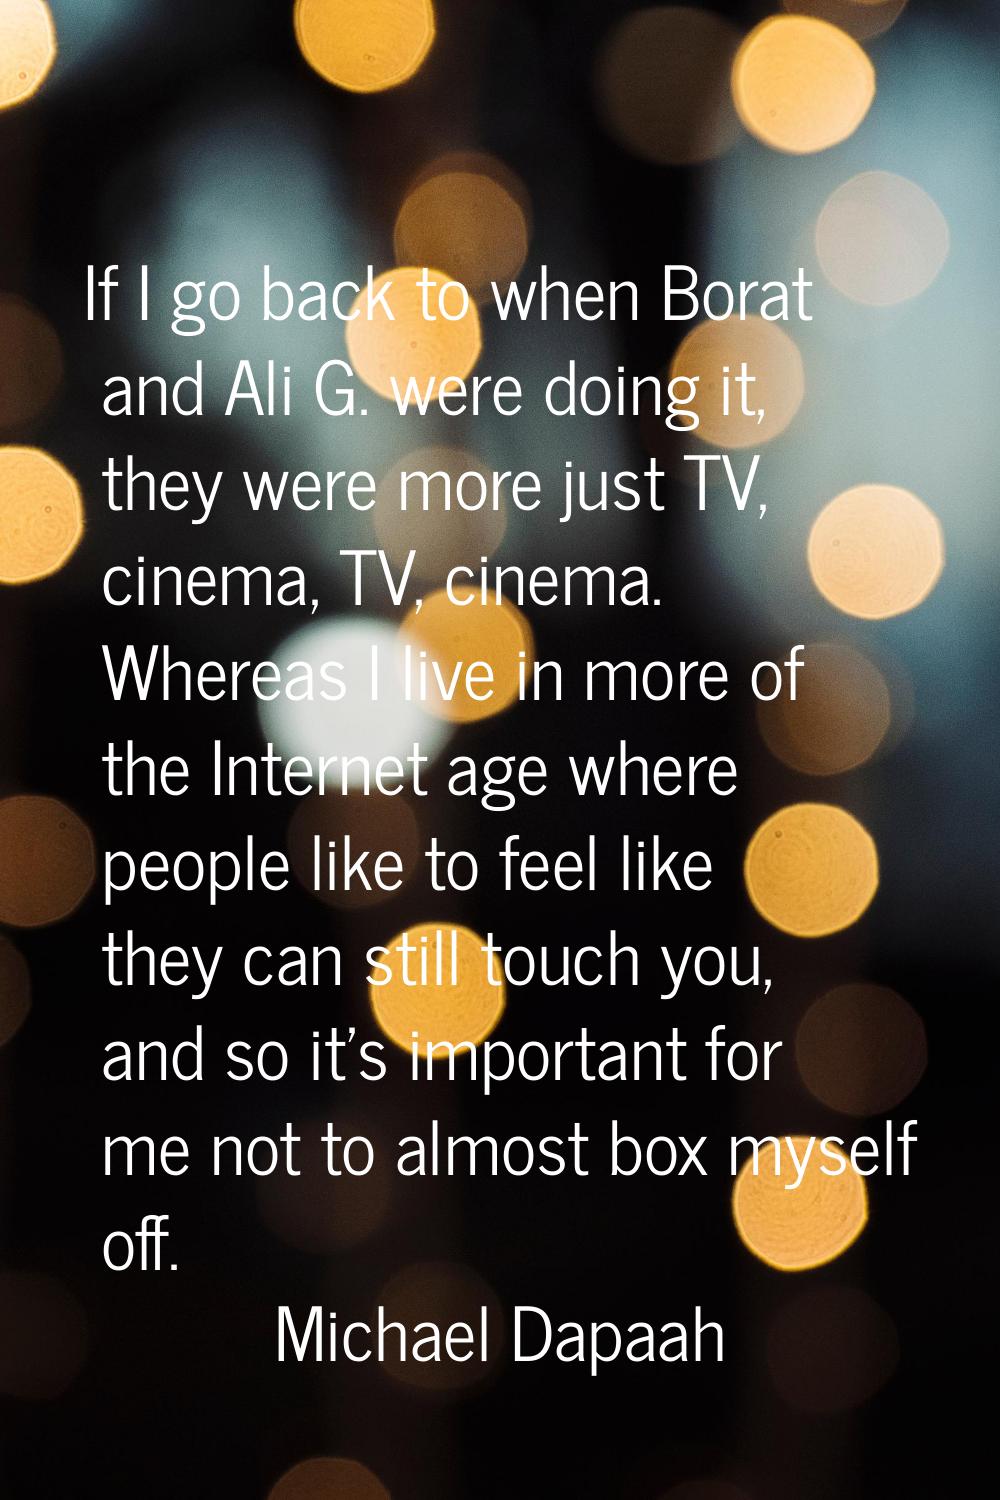 If I go back to when Borat and Ali G. were doing it, they were more just TV, cinema, TV, cinema. Wh